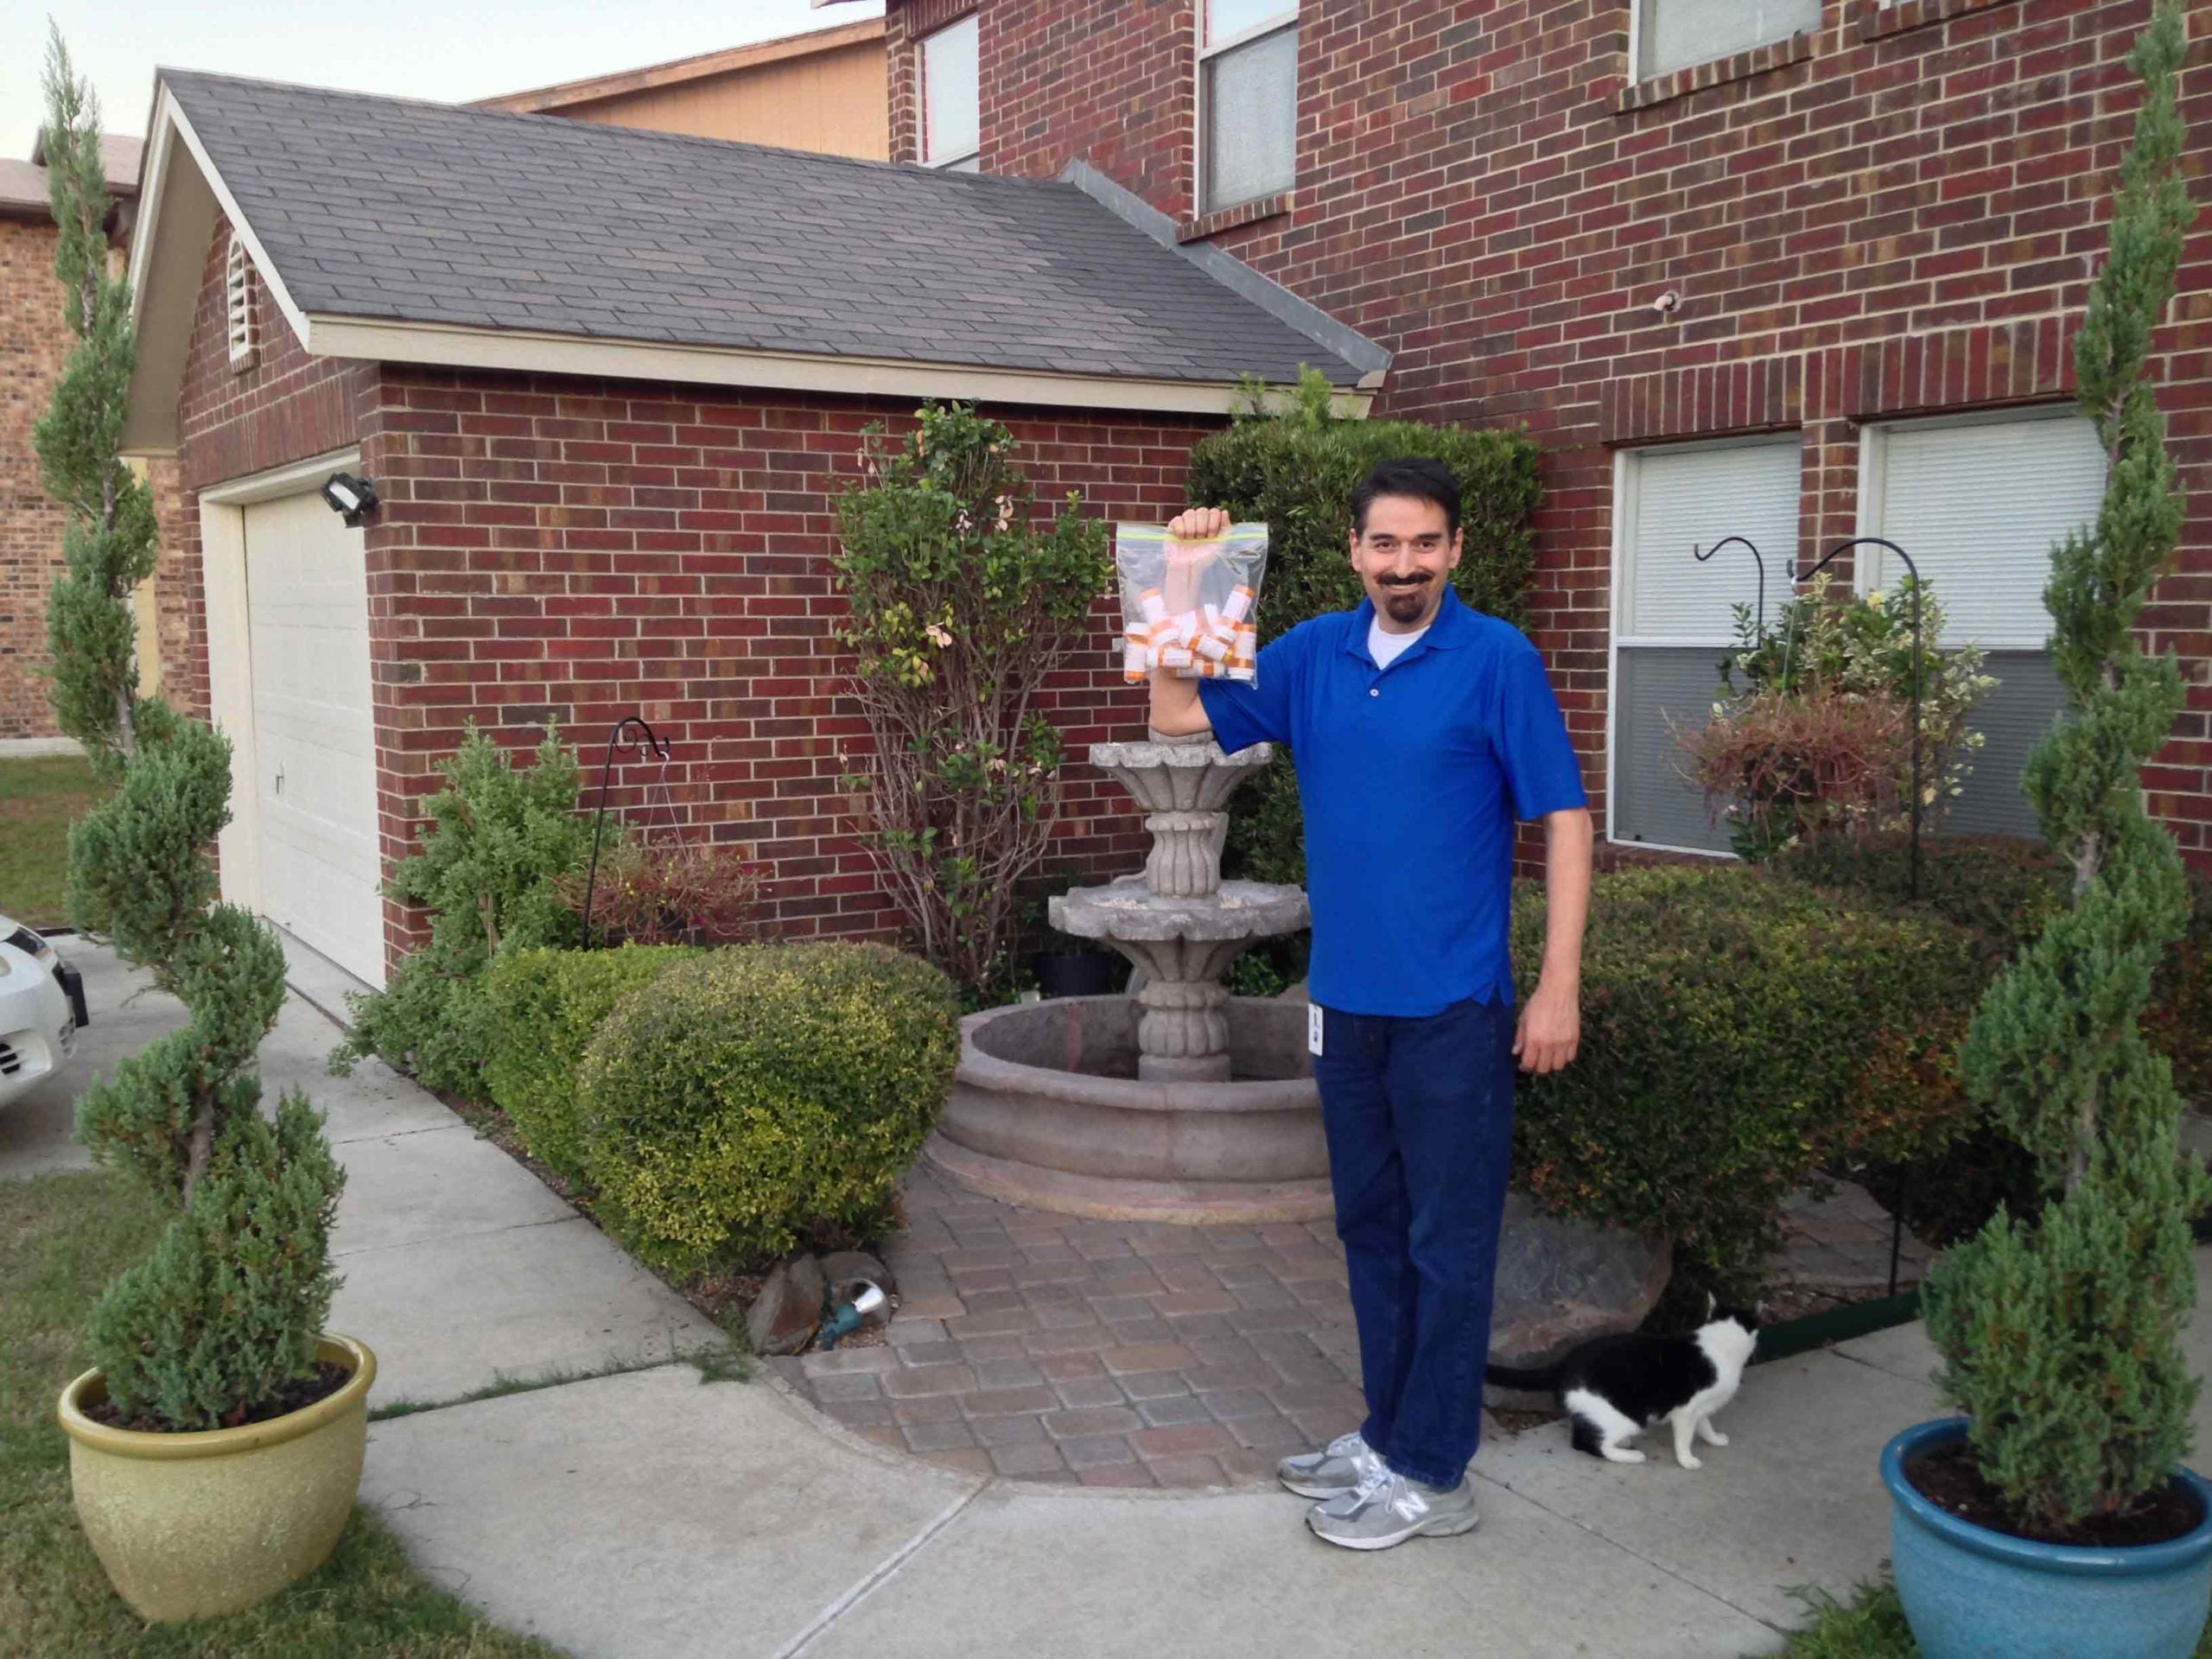 Mark Pro standing out front of his house holding a bag of medications that he was able to discontinue after adopting a plant-based diet